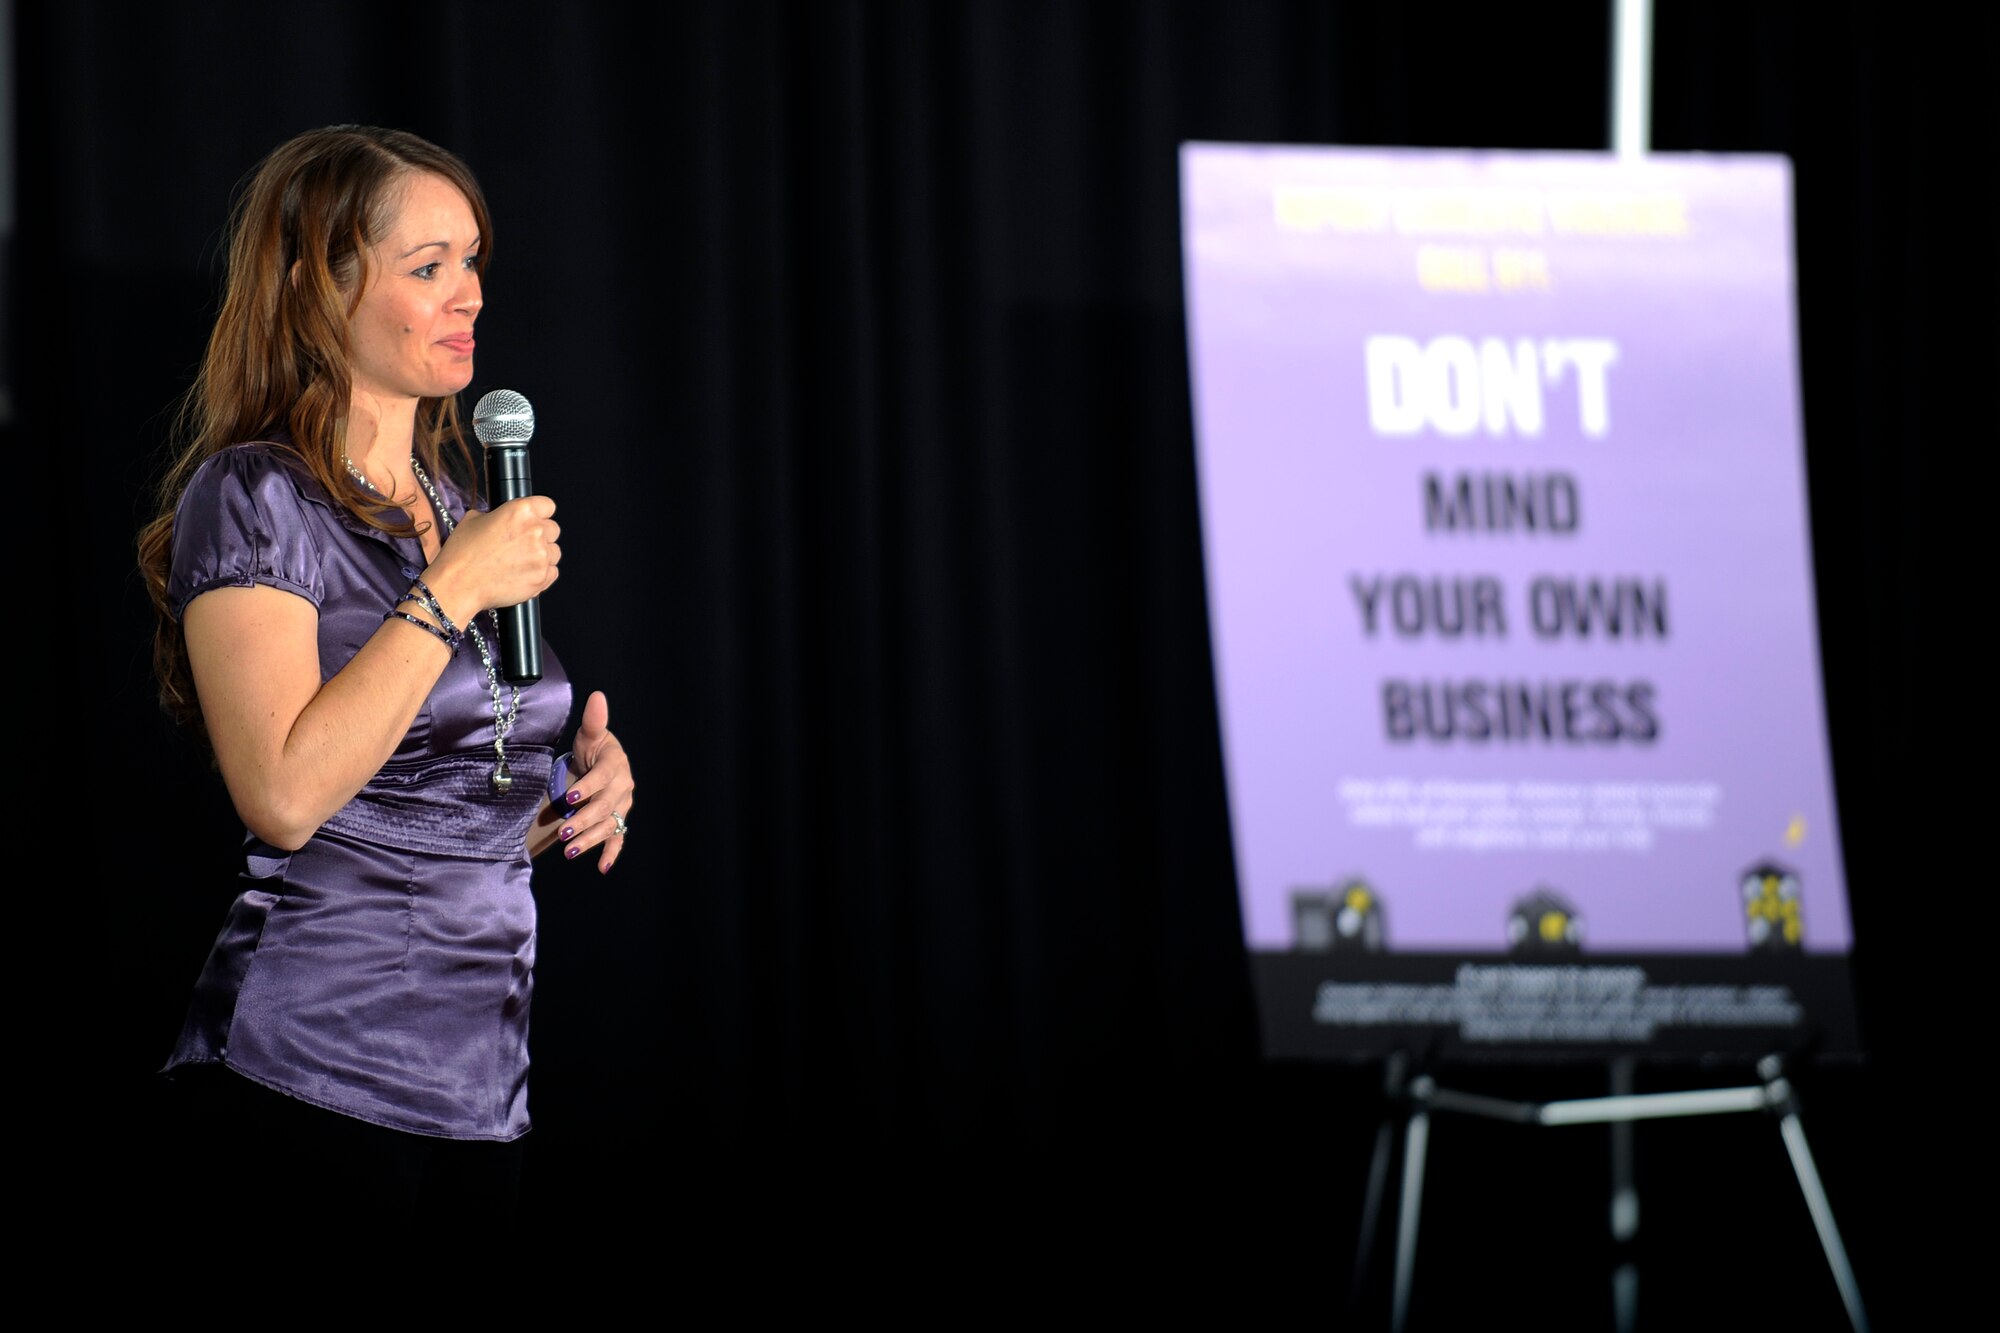 Doris Rivera-Black, a survivor of sexual assault and domestic violence, shared her story with cadets and Airmen Oct. 15, 2015 in Arnold Hall as part of the Air Force Academy’s efforts to highlight Domestic Violence Awareness Month. (U.S. Air Force photo by Jason Gutierrez)